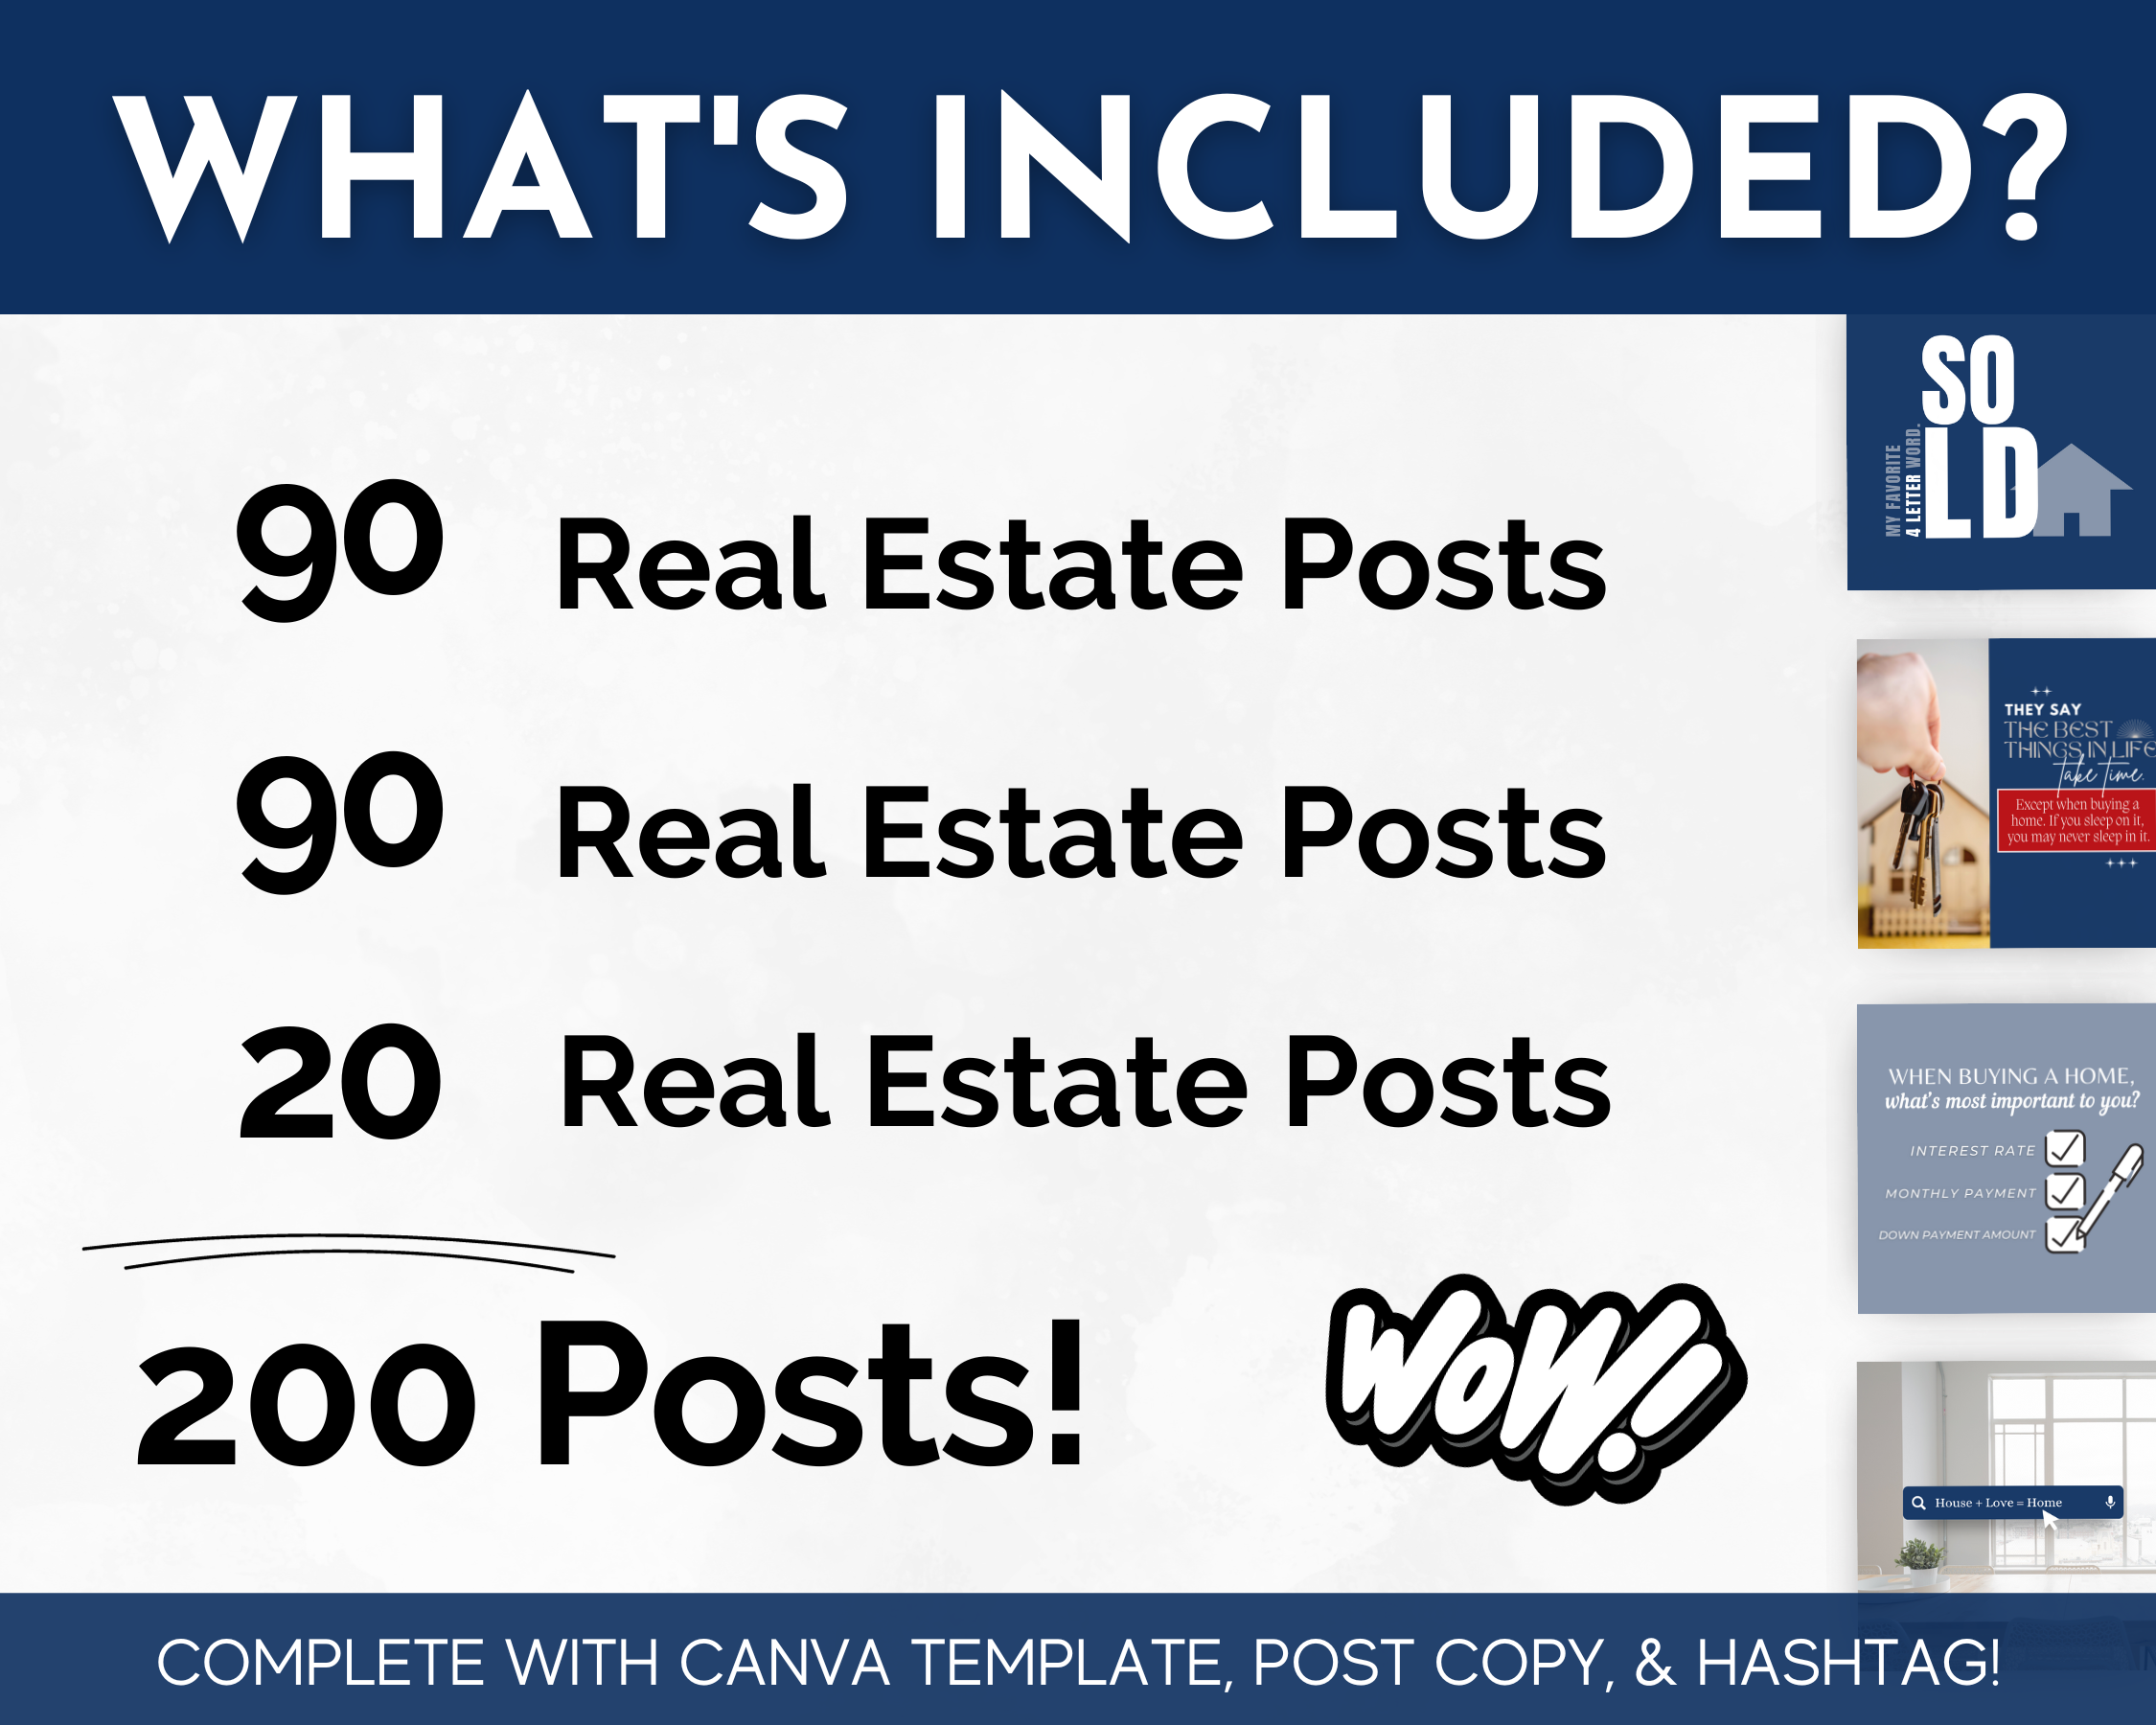 Socially Inclined's Real Estate Social Media 200 Post Bundle - With Canva Templates typically includes content related to the real estate industry on social media platforms.